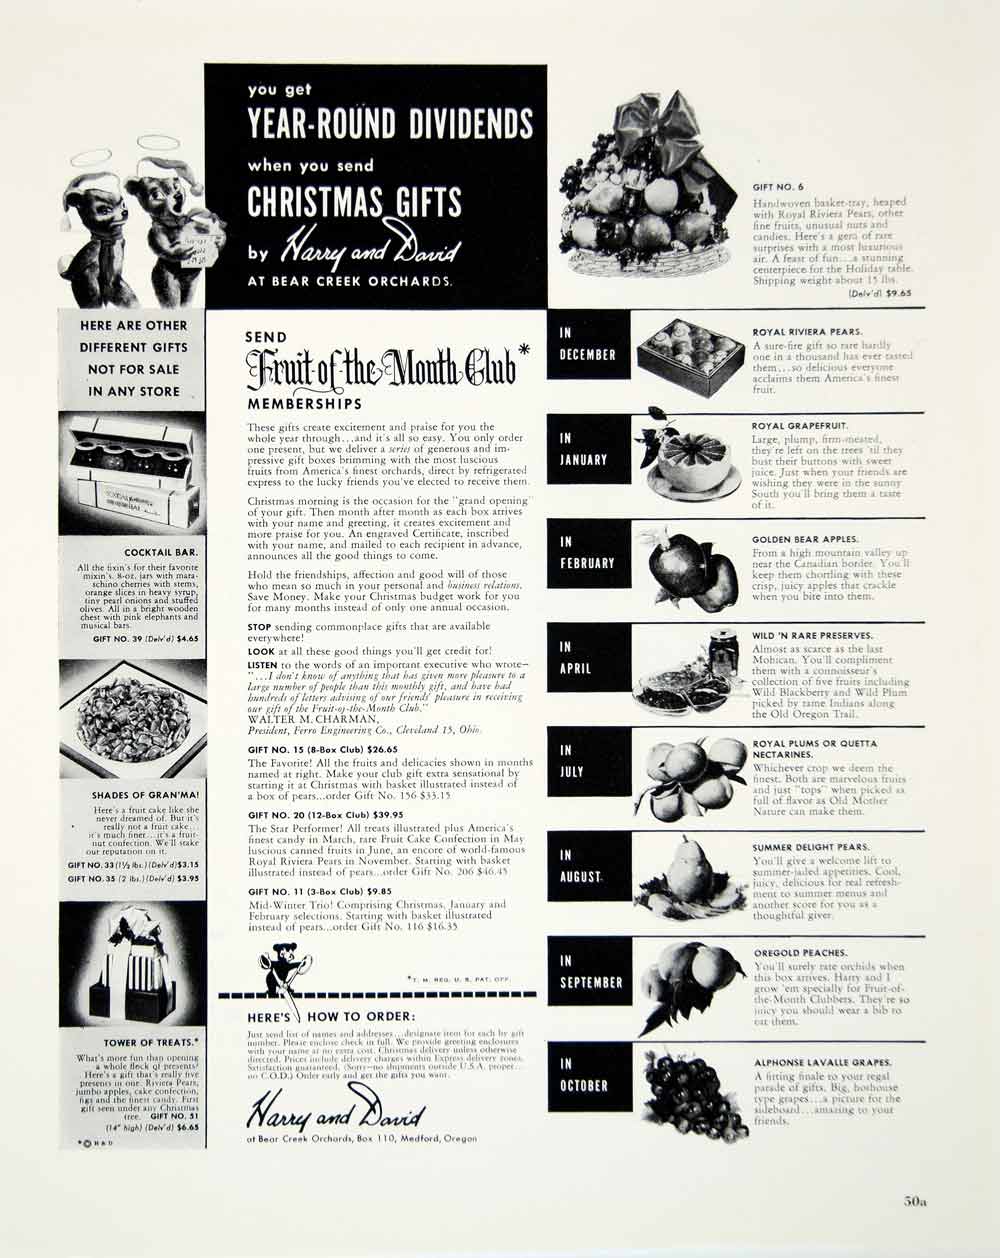 1948 Ad Christmas Gifts Harry David Bear Creek Orchards Pear Apple Peaches FTM3